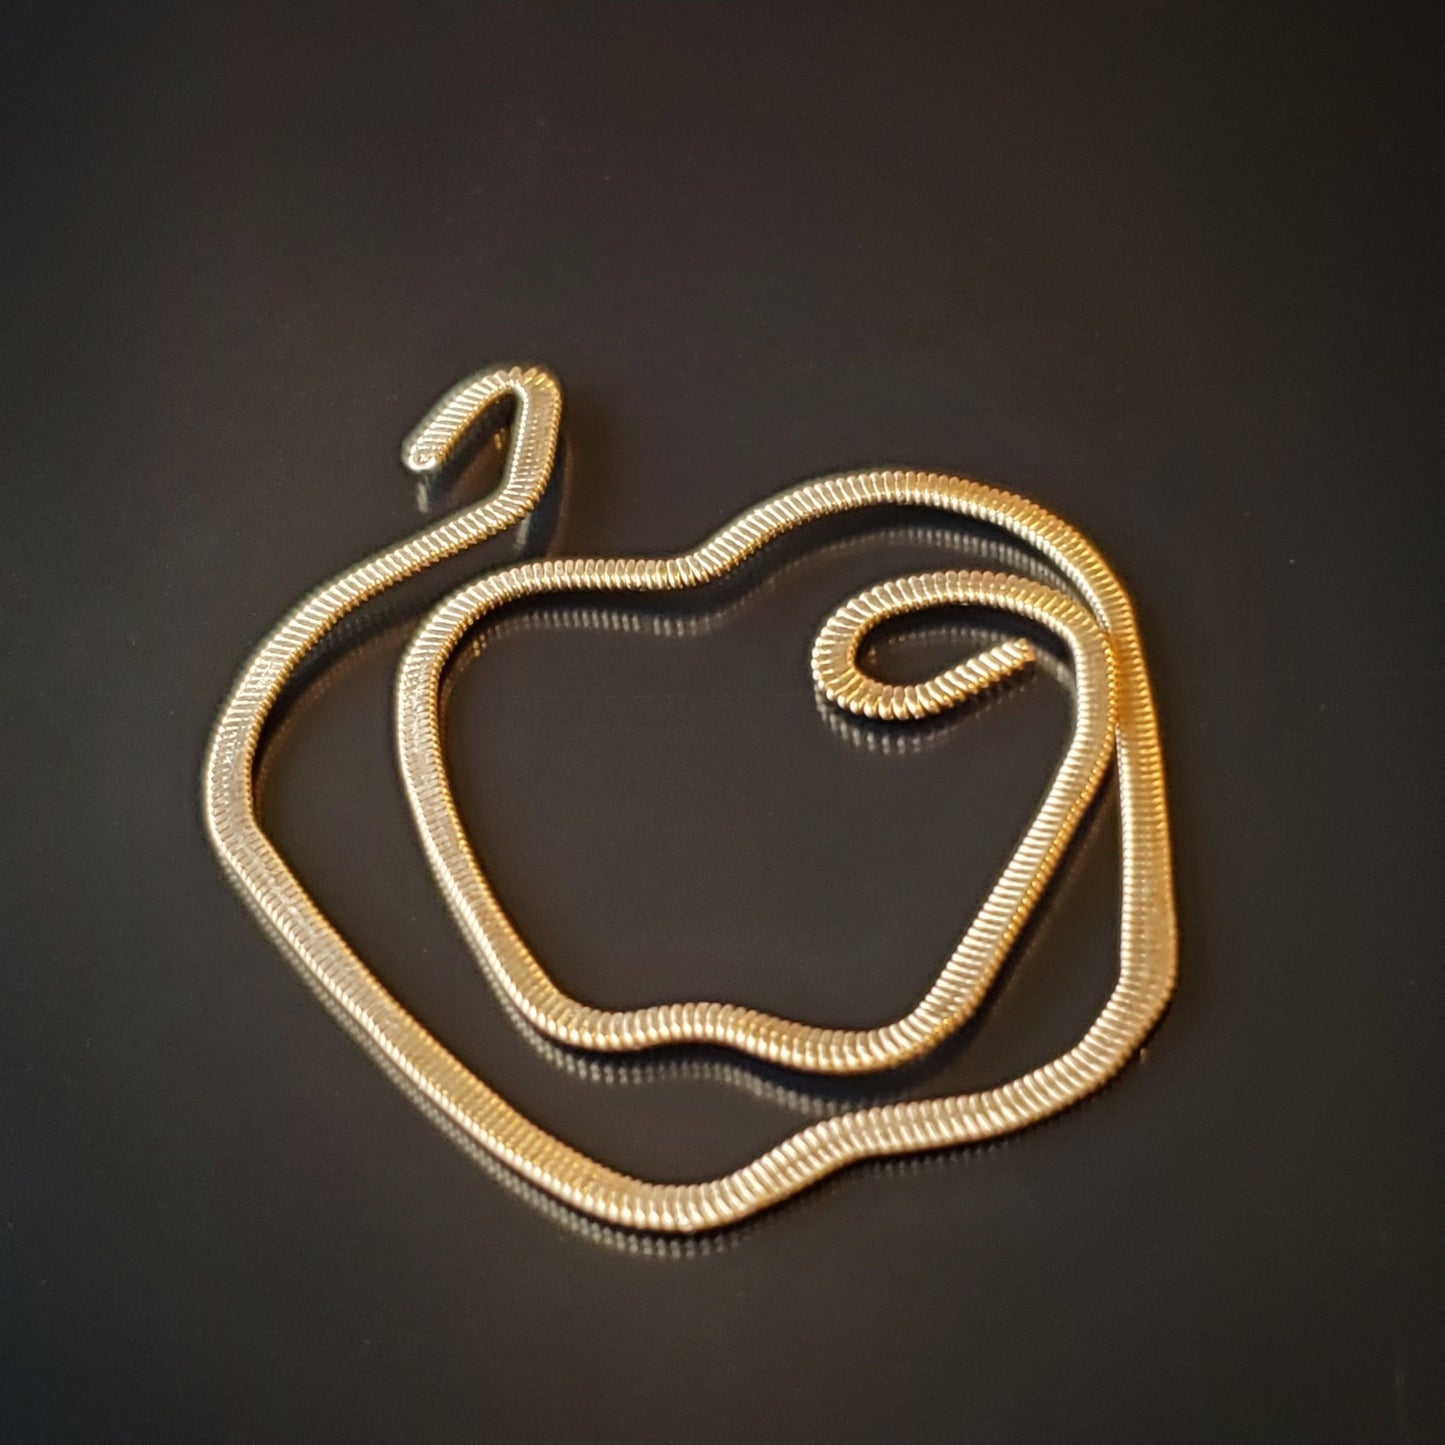 gold guitar string bookmark shaped like an apple on a black background